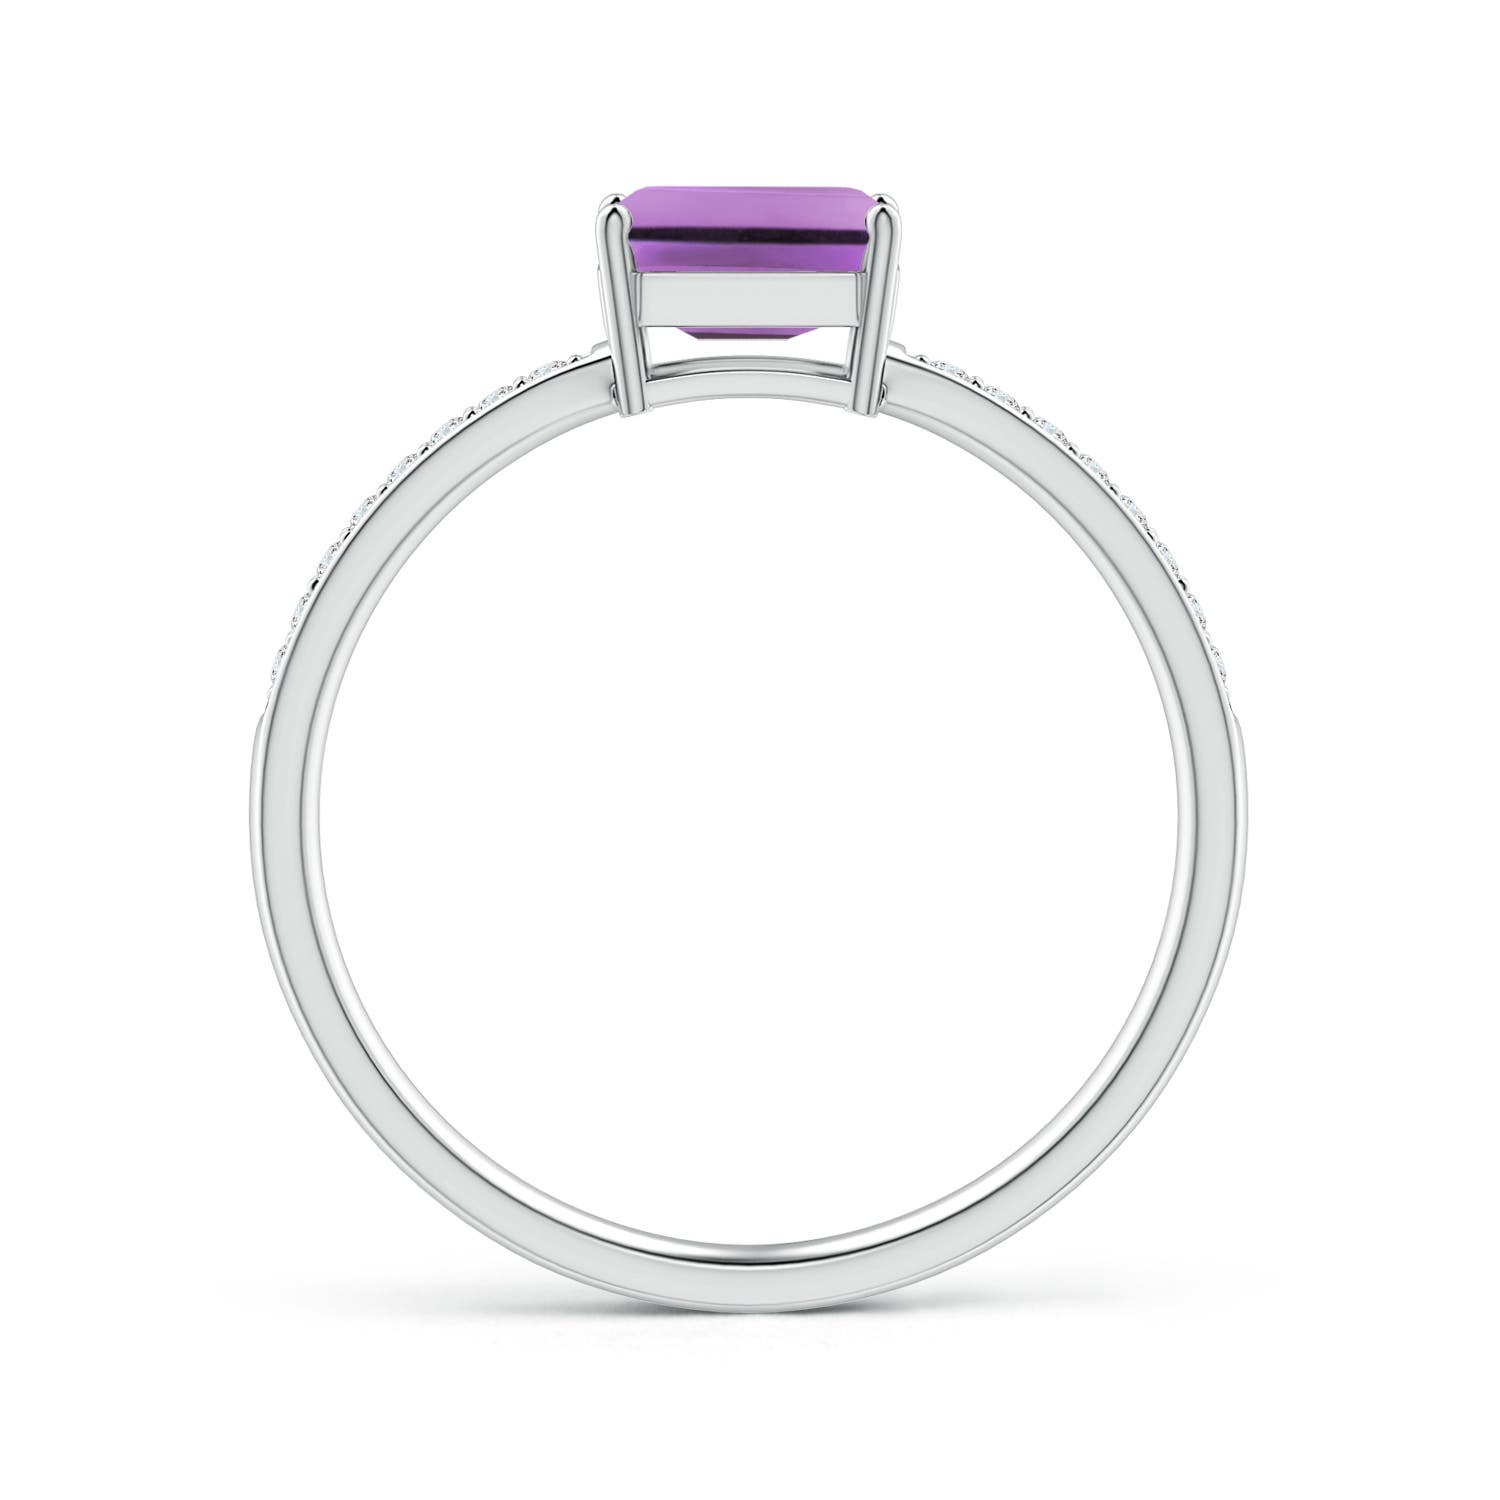 A - Amethyst / 0.63 CT / 14 KT White Gold